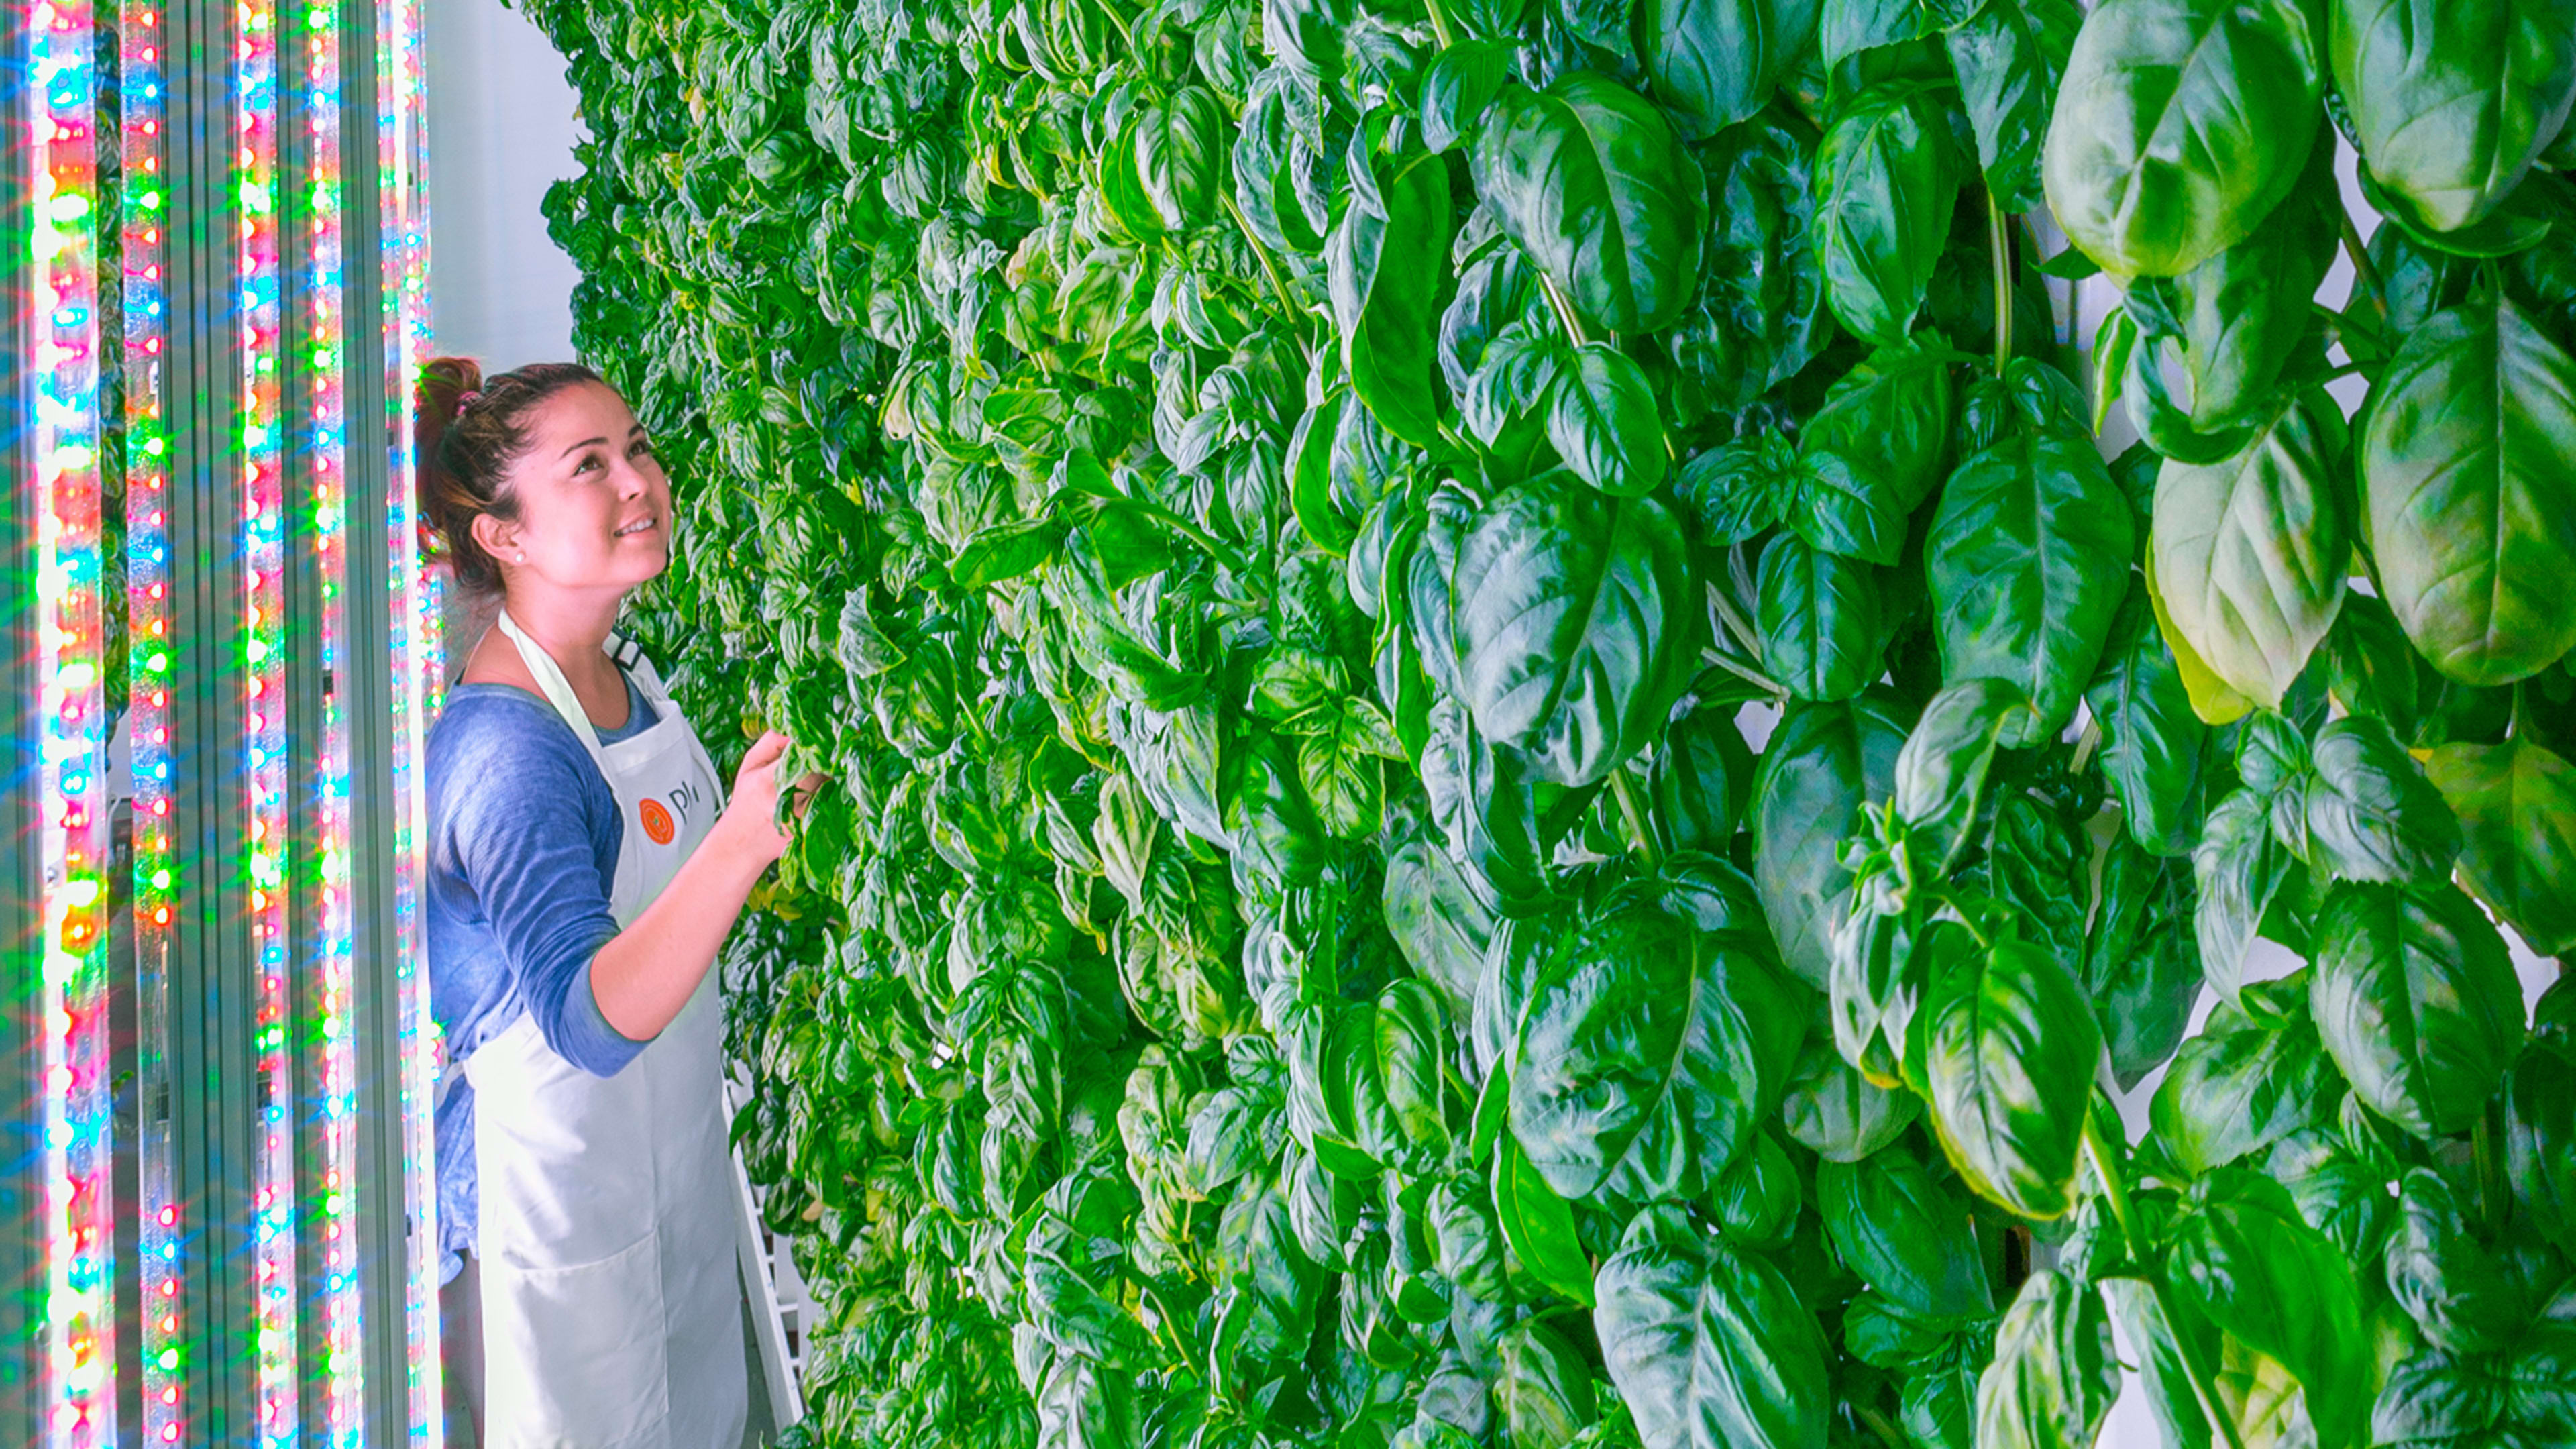 Has This Silicon Valley Startup Finally Nailed The Indoor Farming Model?